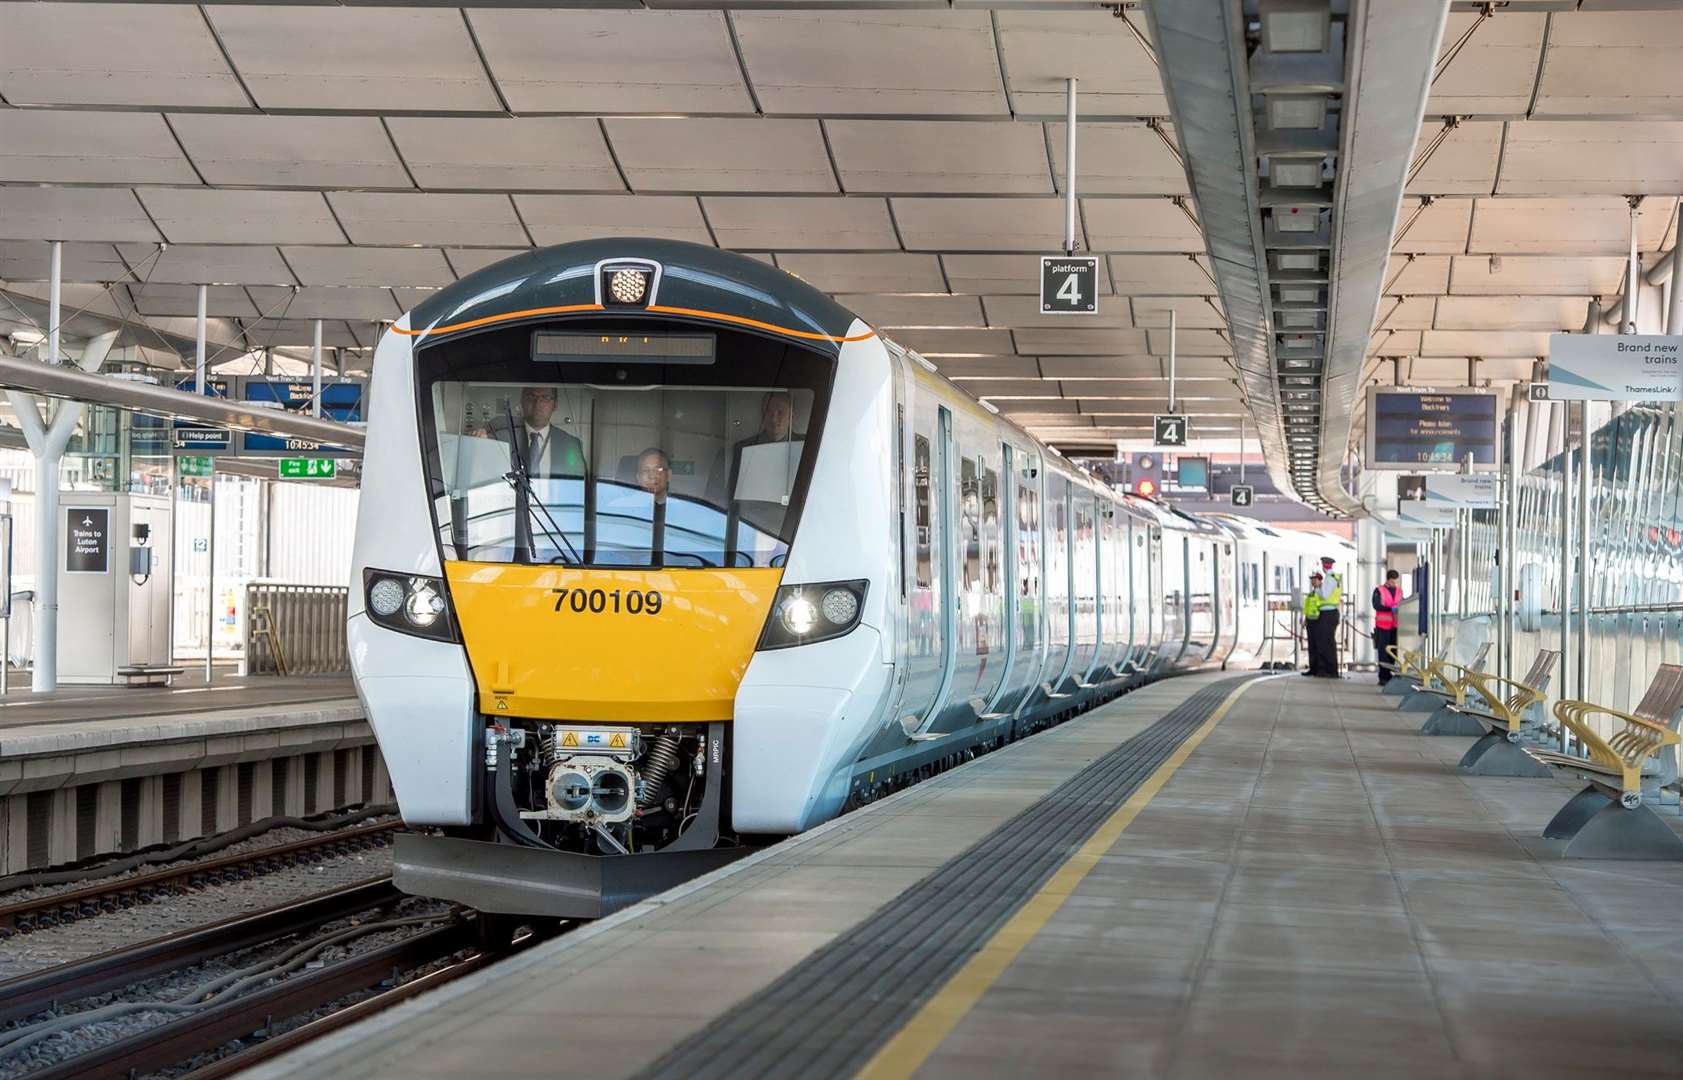 Maidstone rail travellers must first make their way to Blackfriars, before they can connect to Thameslink